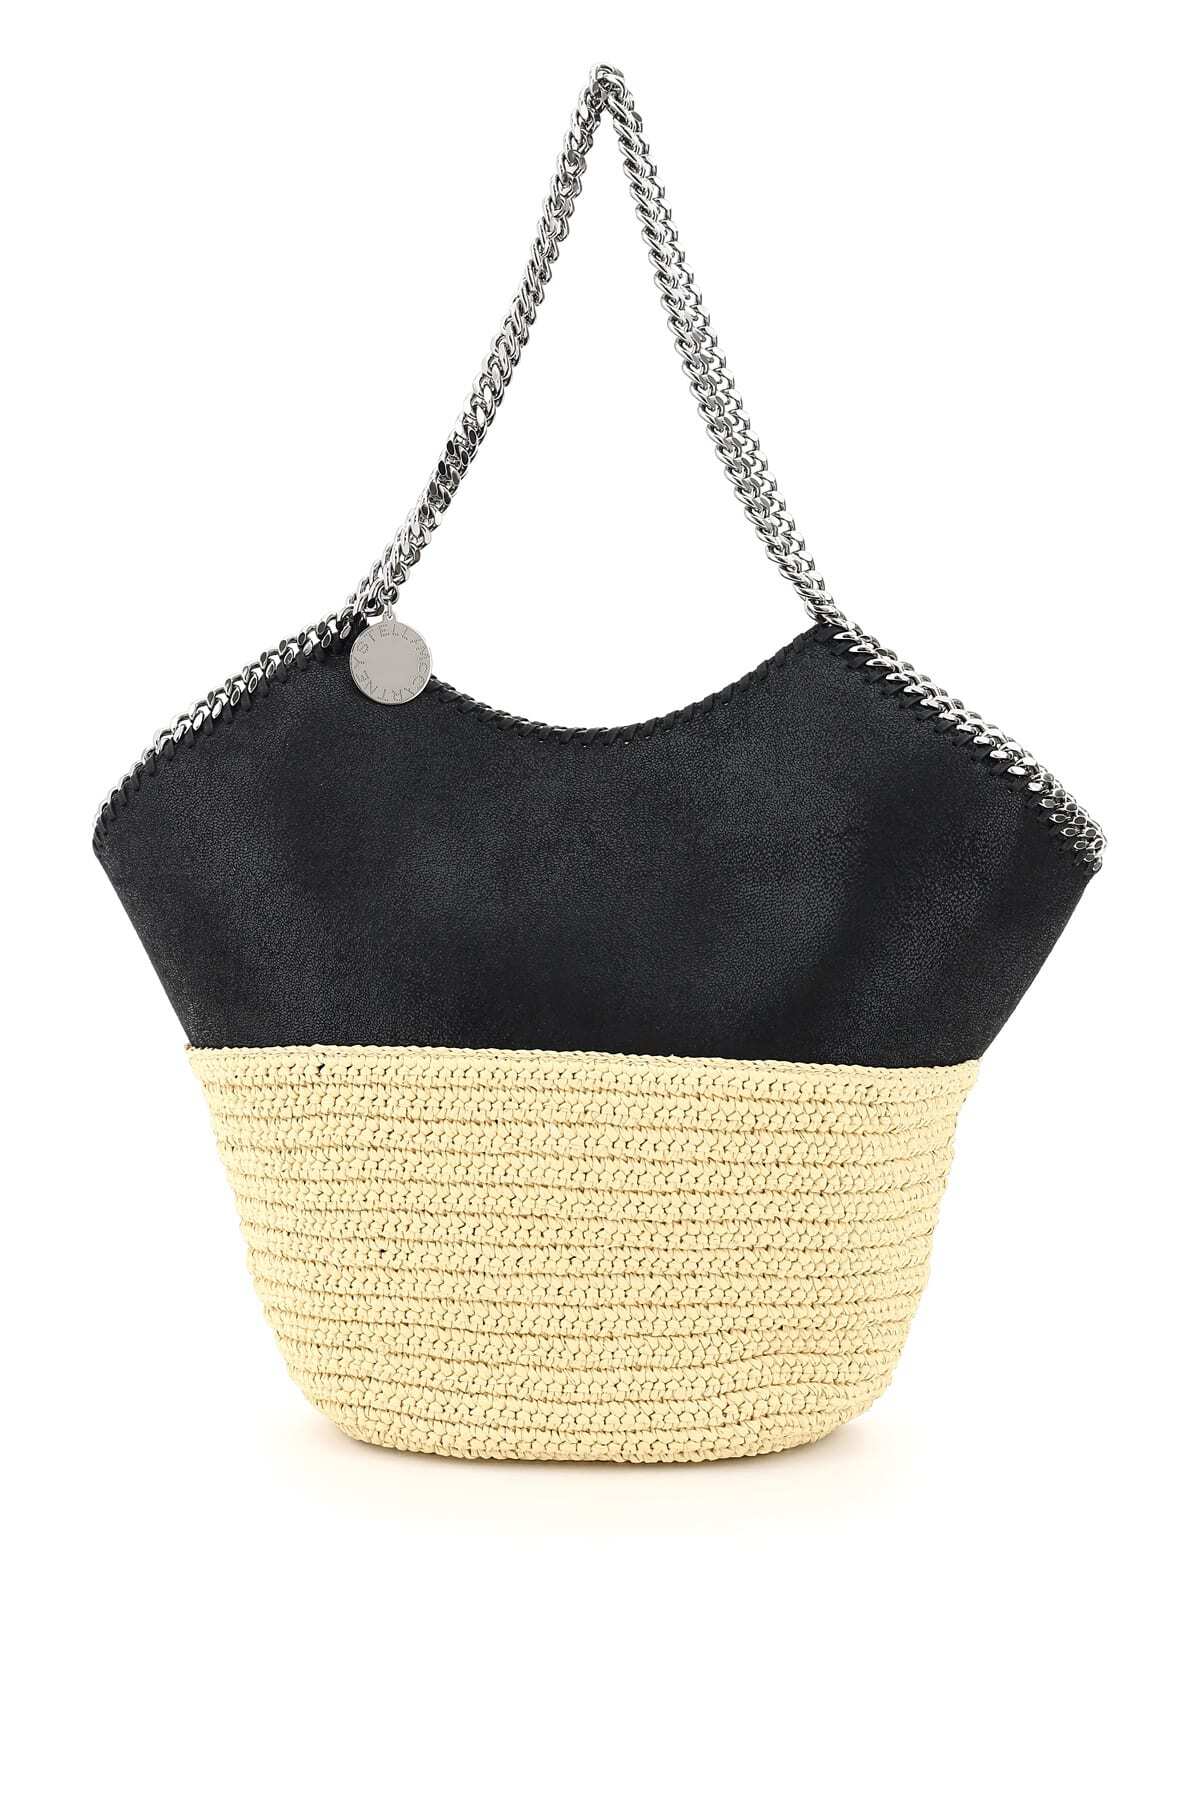 Stella McCartney Large Faux Leather And Raffia Tote With Chain in nero